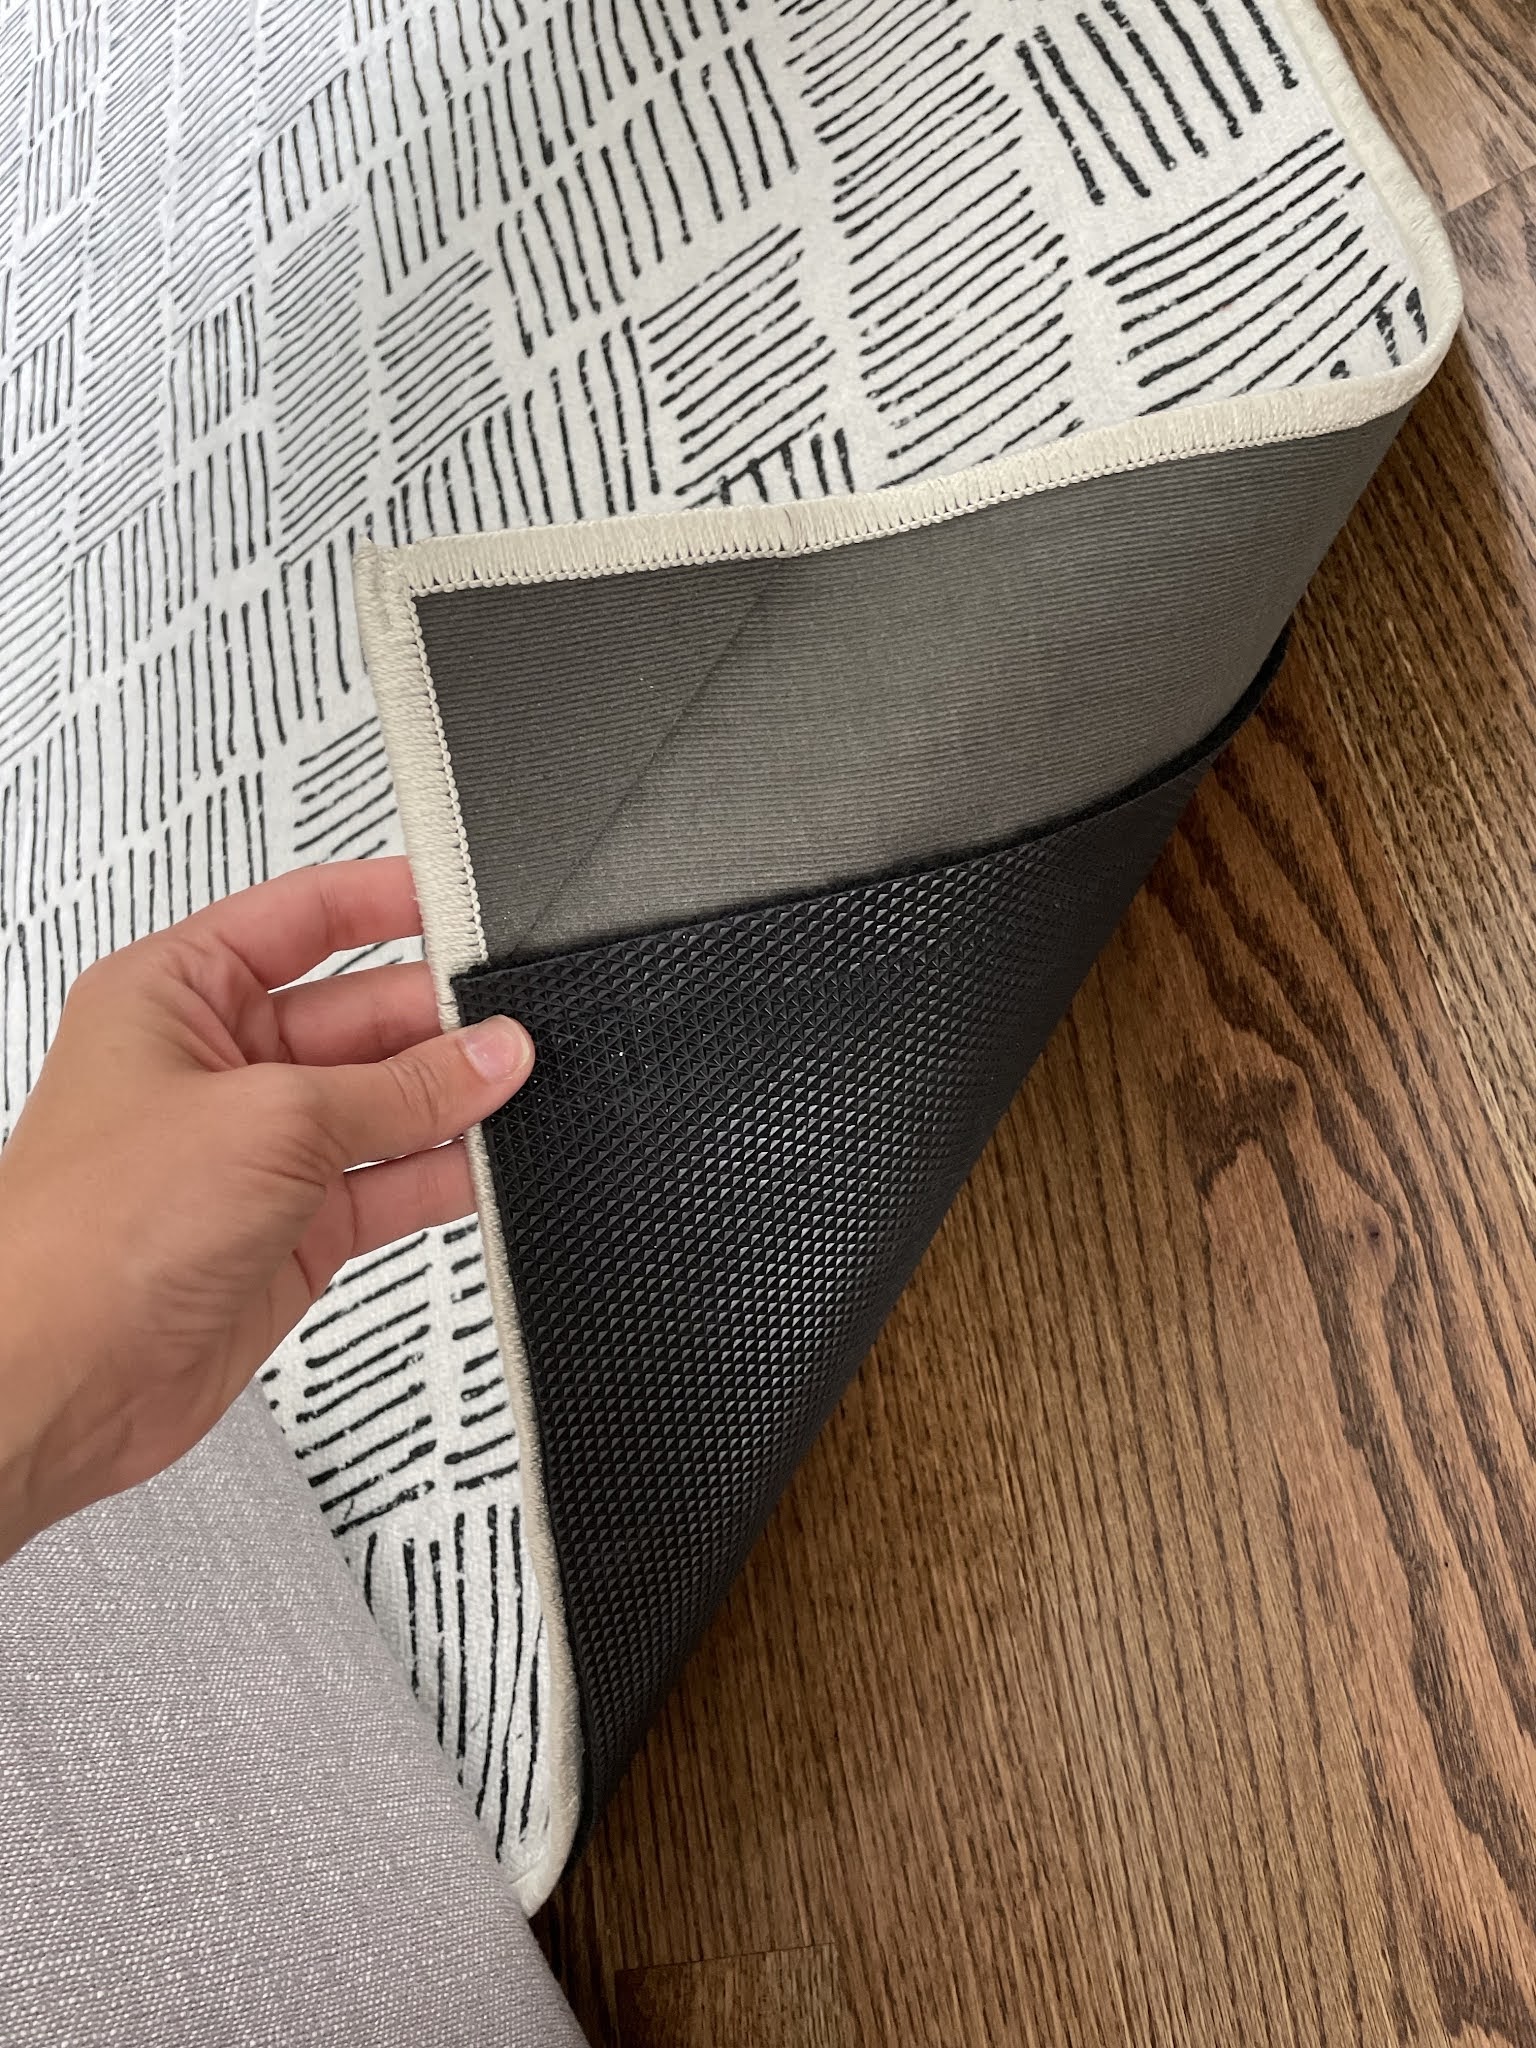 Ruggable vs. House of Noa Washable Rugs and Mats Review